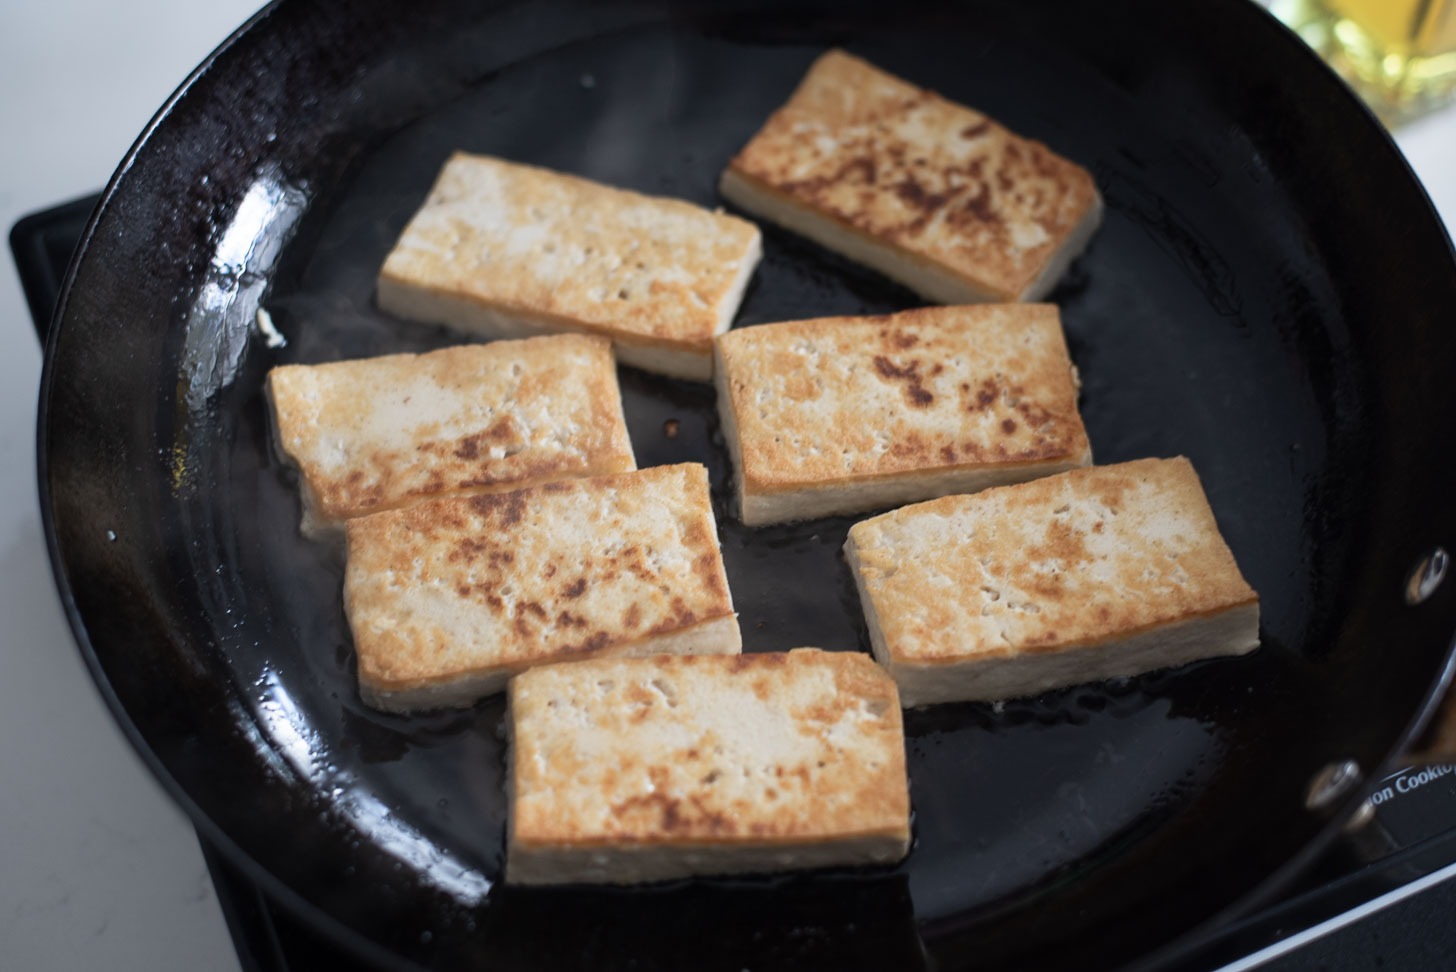 Tofu slices are pan fried in a skillet to golden crisp.